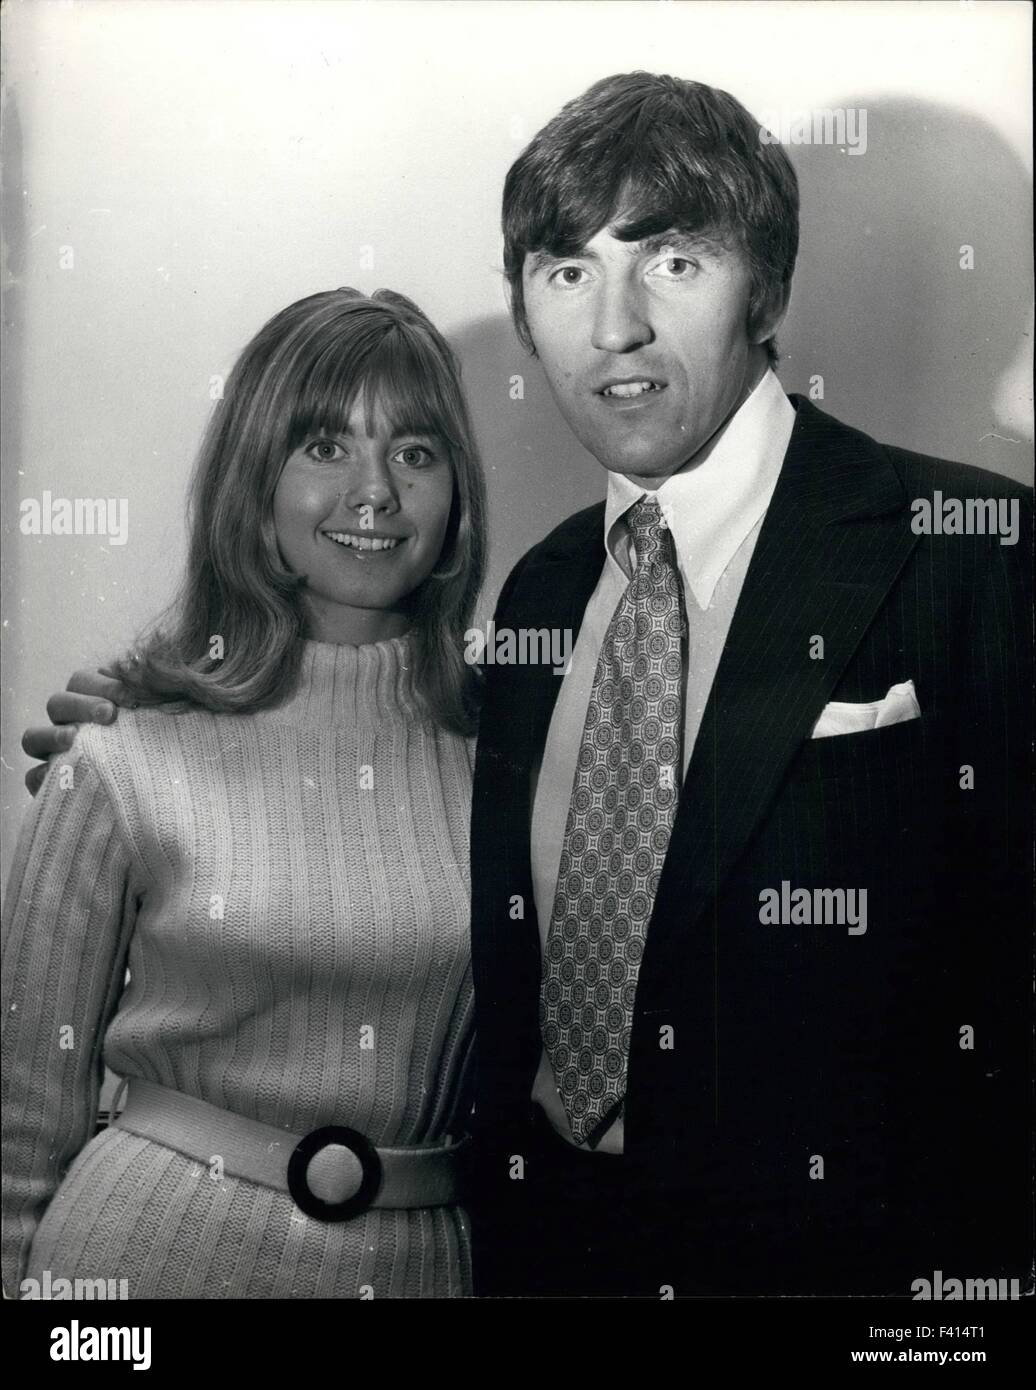 Feb. 24, 1962 - Shadows Guitarist engaged to Australian Actress: Bruce Welch, guitarist with the Shadows group, has become engaged to Olivia Newton-John, an Australian actress and singer. Bruce has been married before. Photo shows the couple pictured in London today. © Keystone Pictures USA/ZUMAPRESS.com/Alamy Live News Stock Photo